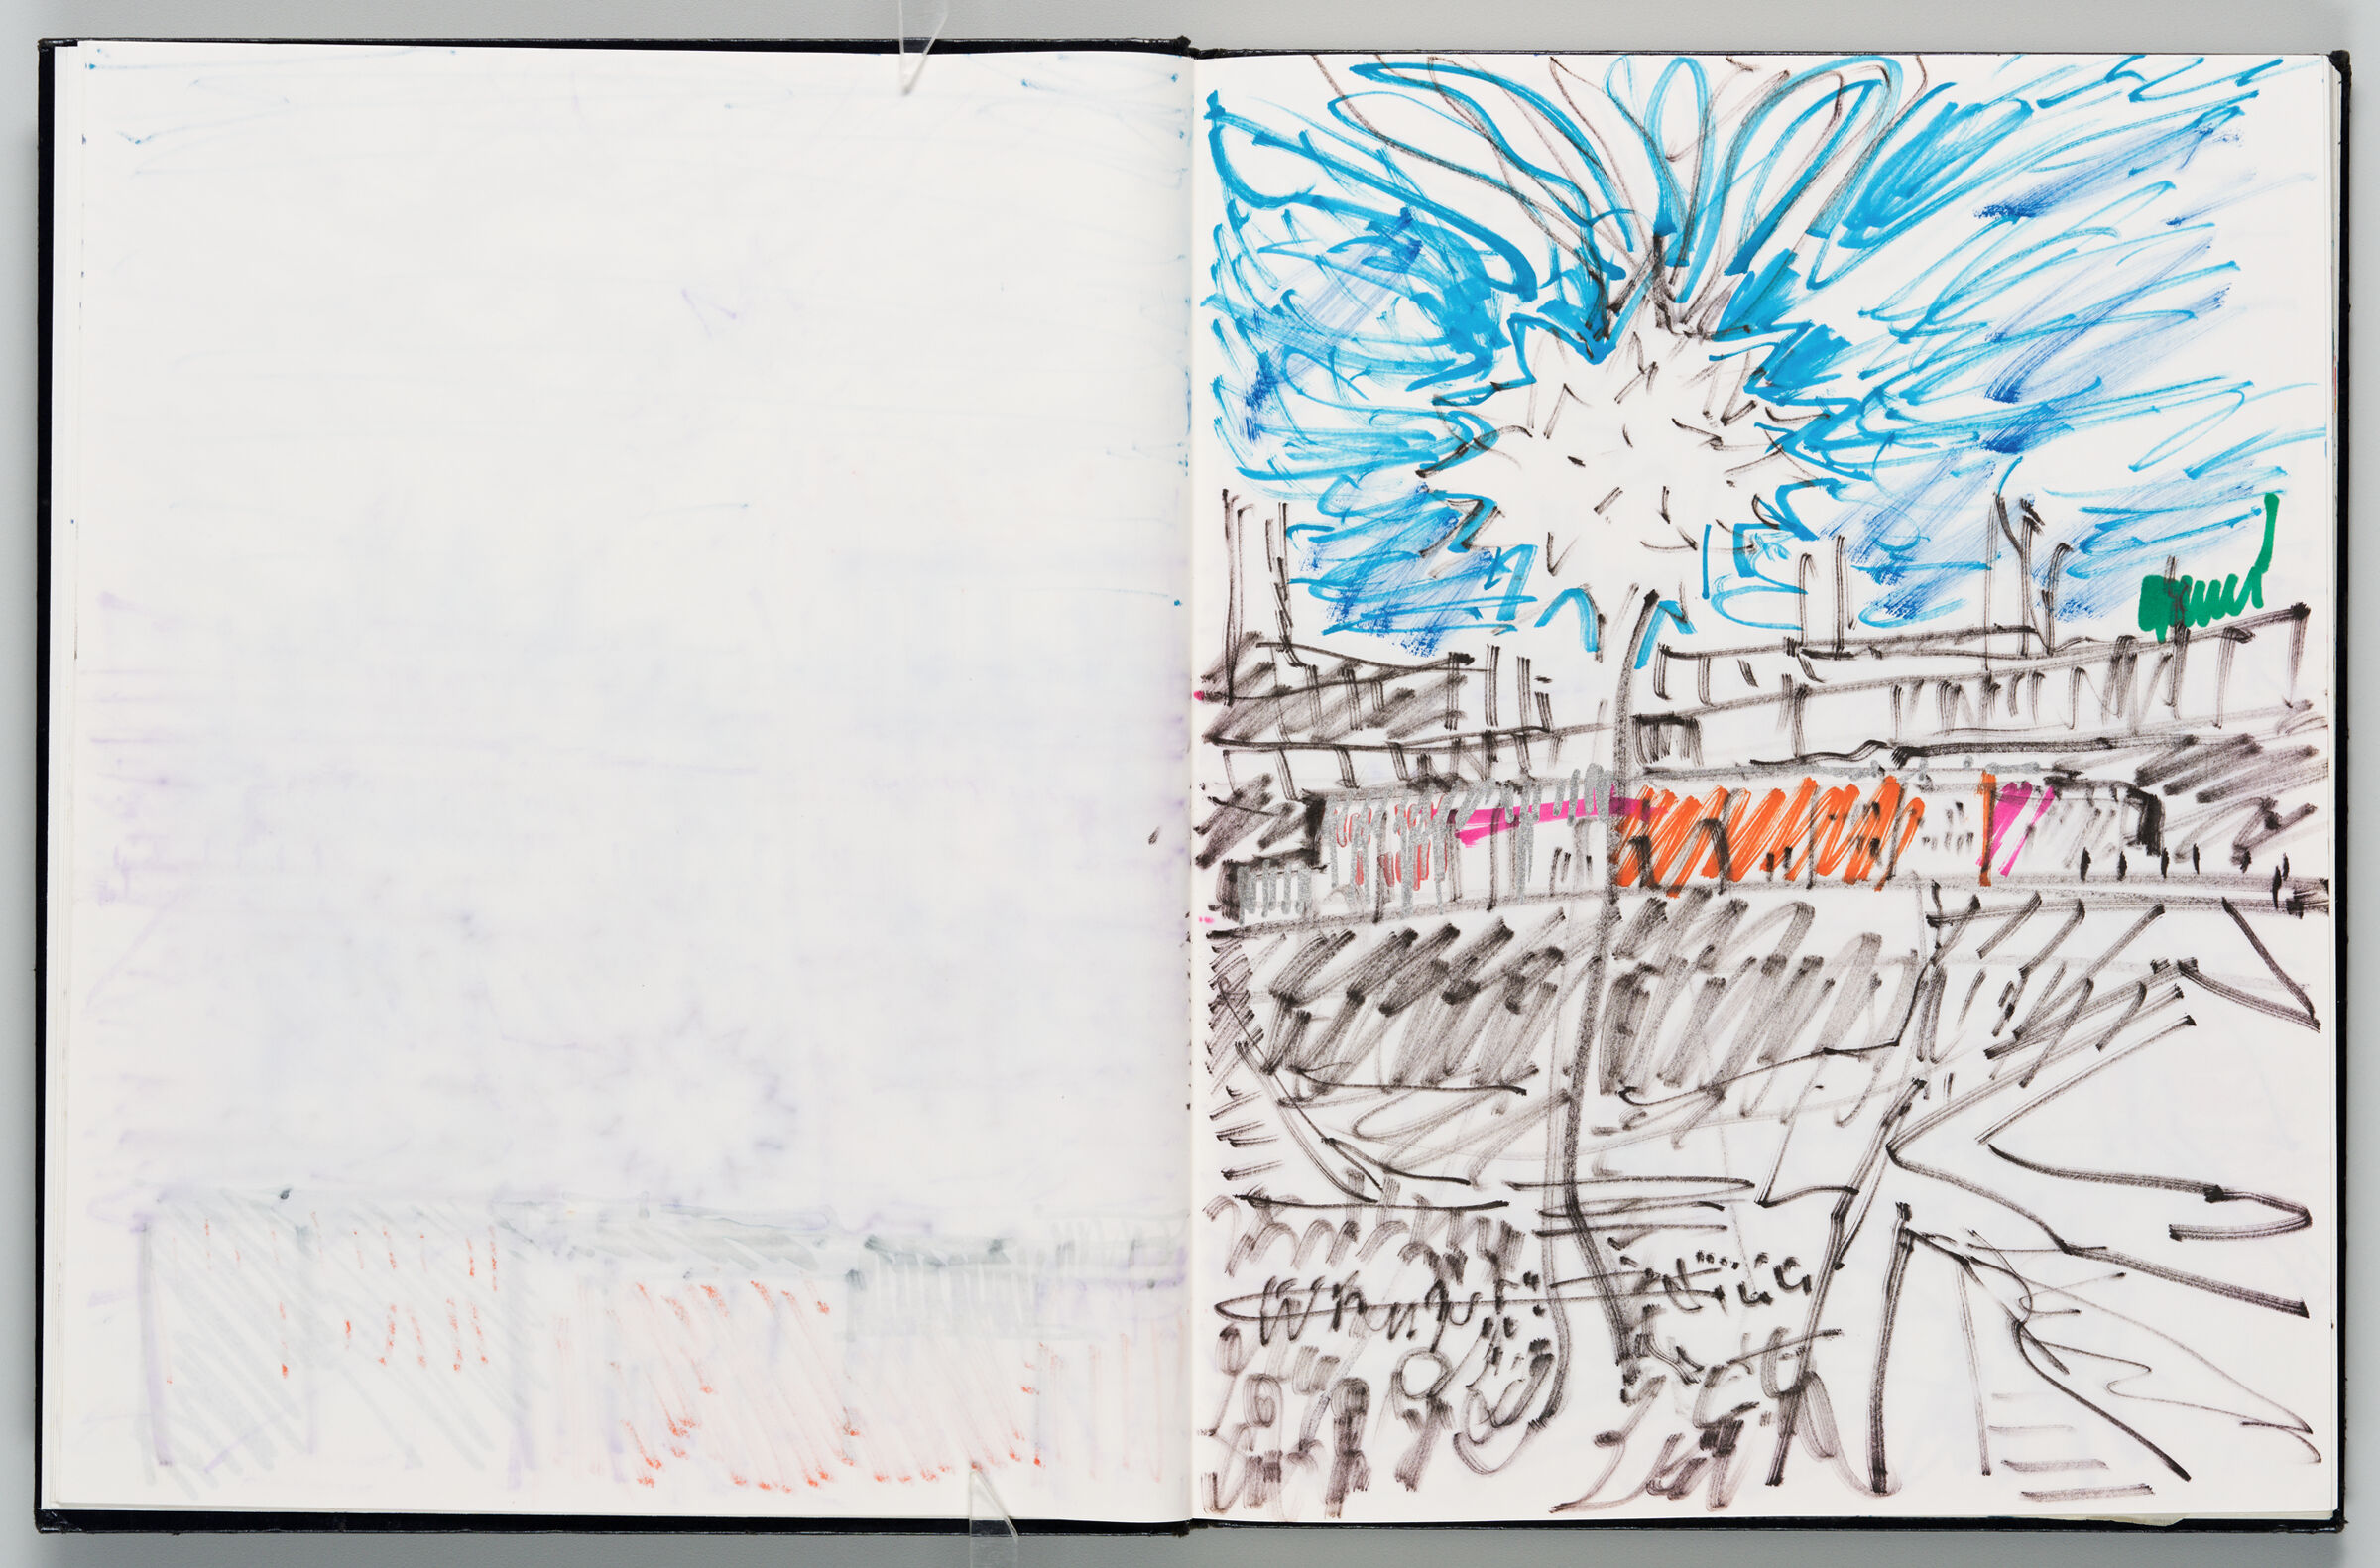 Untitled (Bleed-Through Of Previous Page With Color Transfer, Left Page); Untitled (Star Burst Design For Installation At Obscure In Quebec City, Right Page)